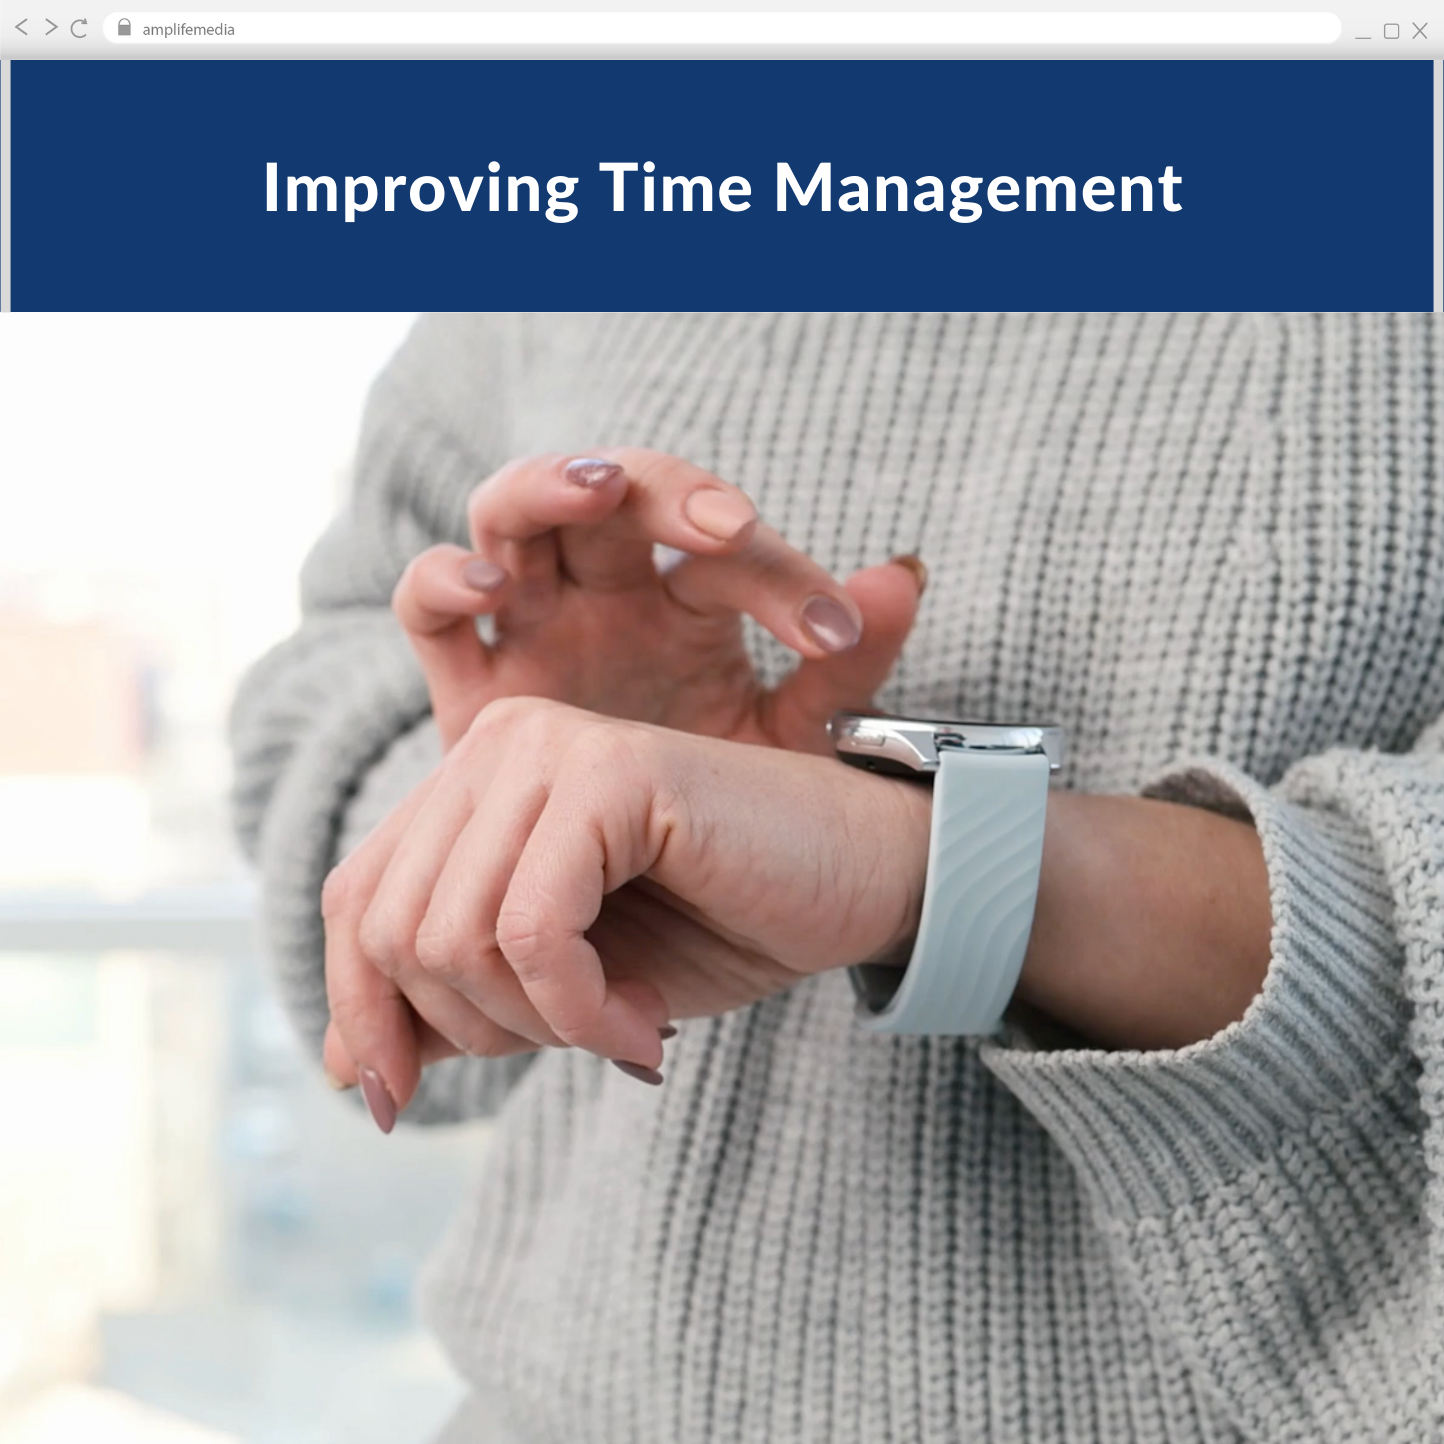 Subscription to Wellbeing Media: Improving Time Management IV 1022